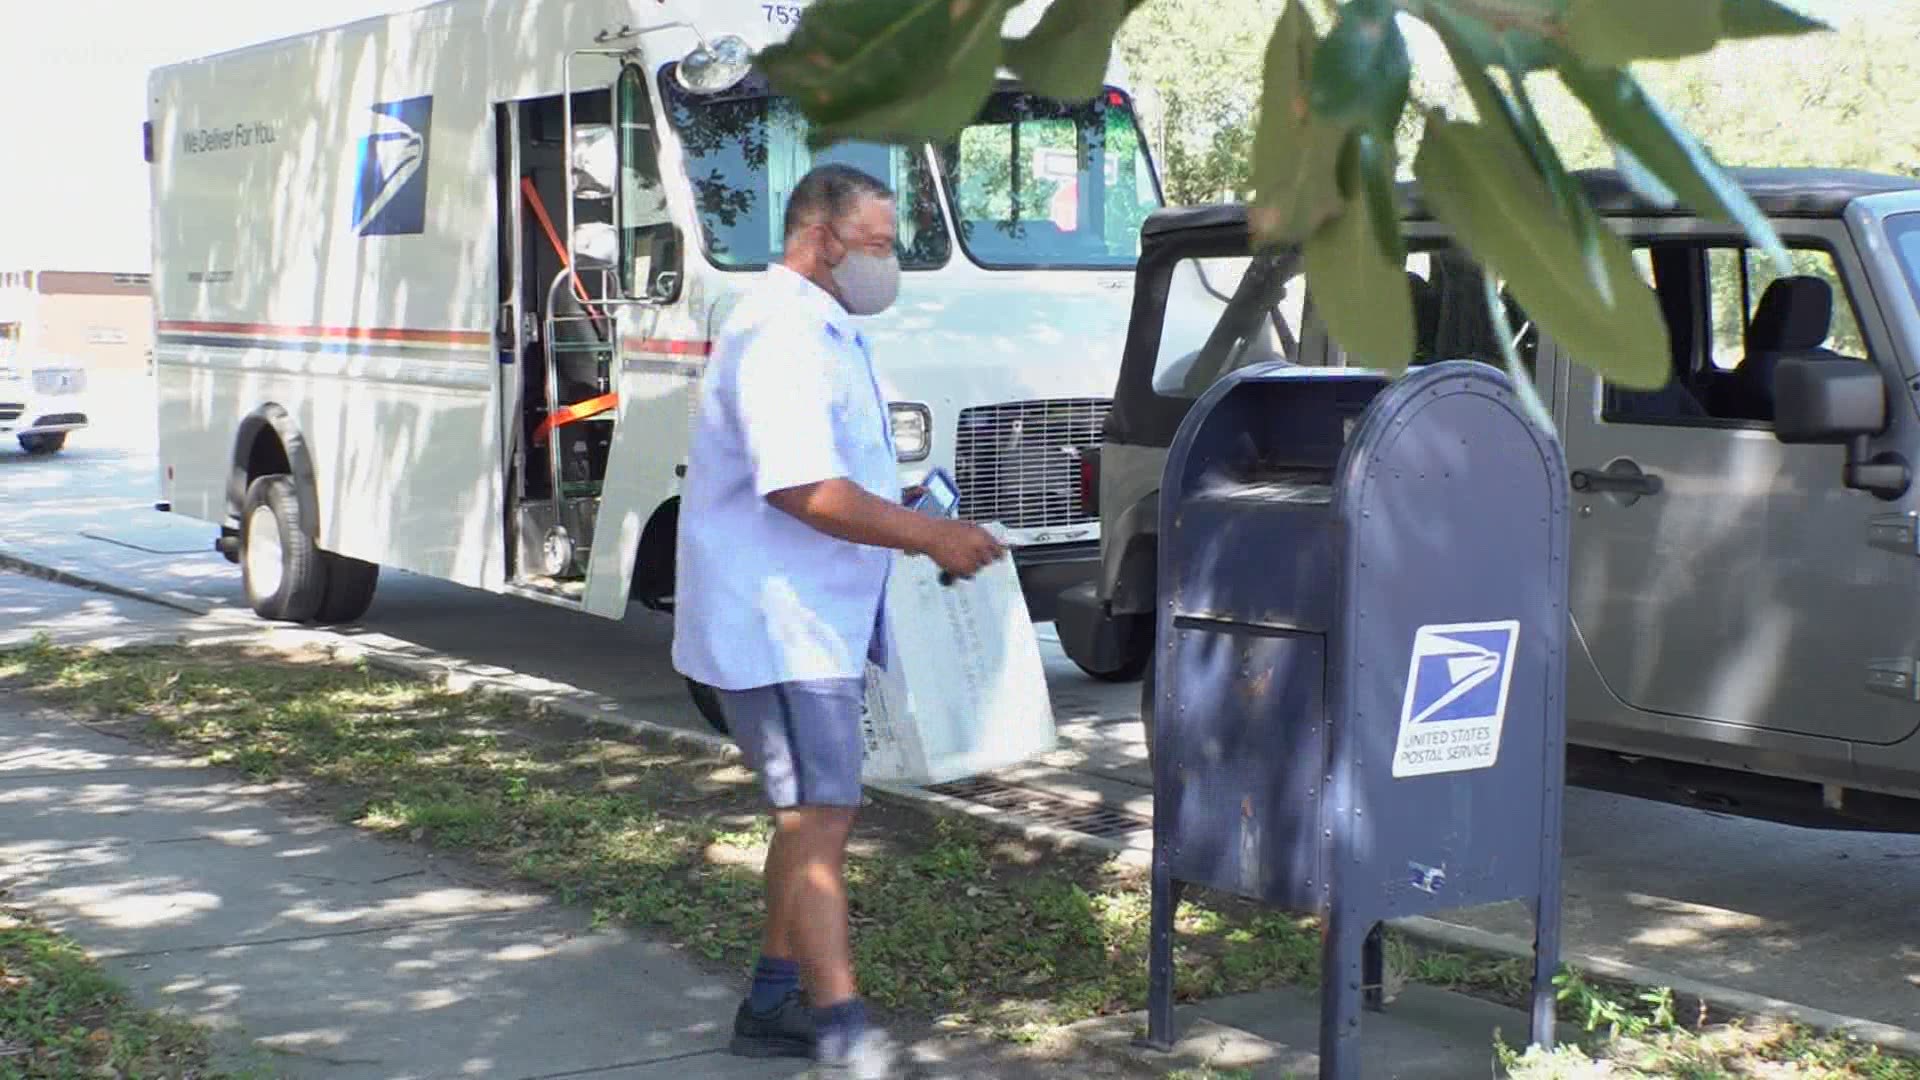 $500 paid or $5,000 stolen? Thieves modify checks taken from Lakeview mailboxes